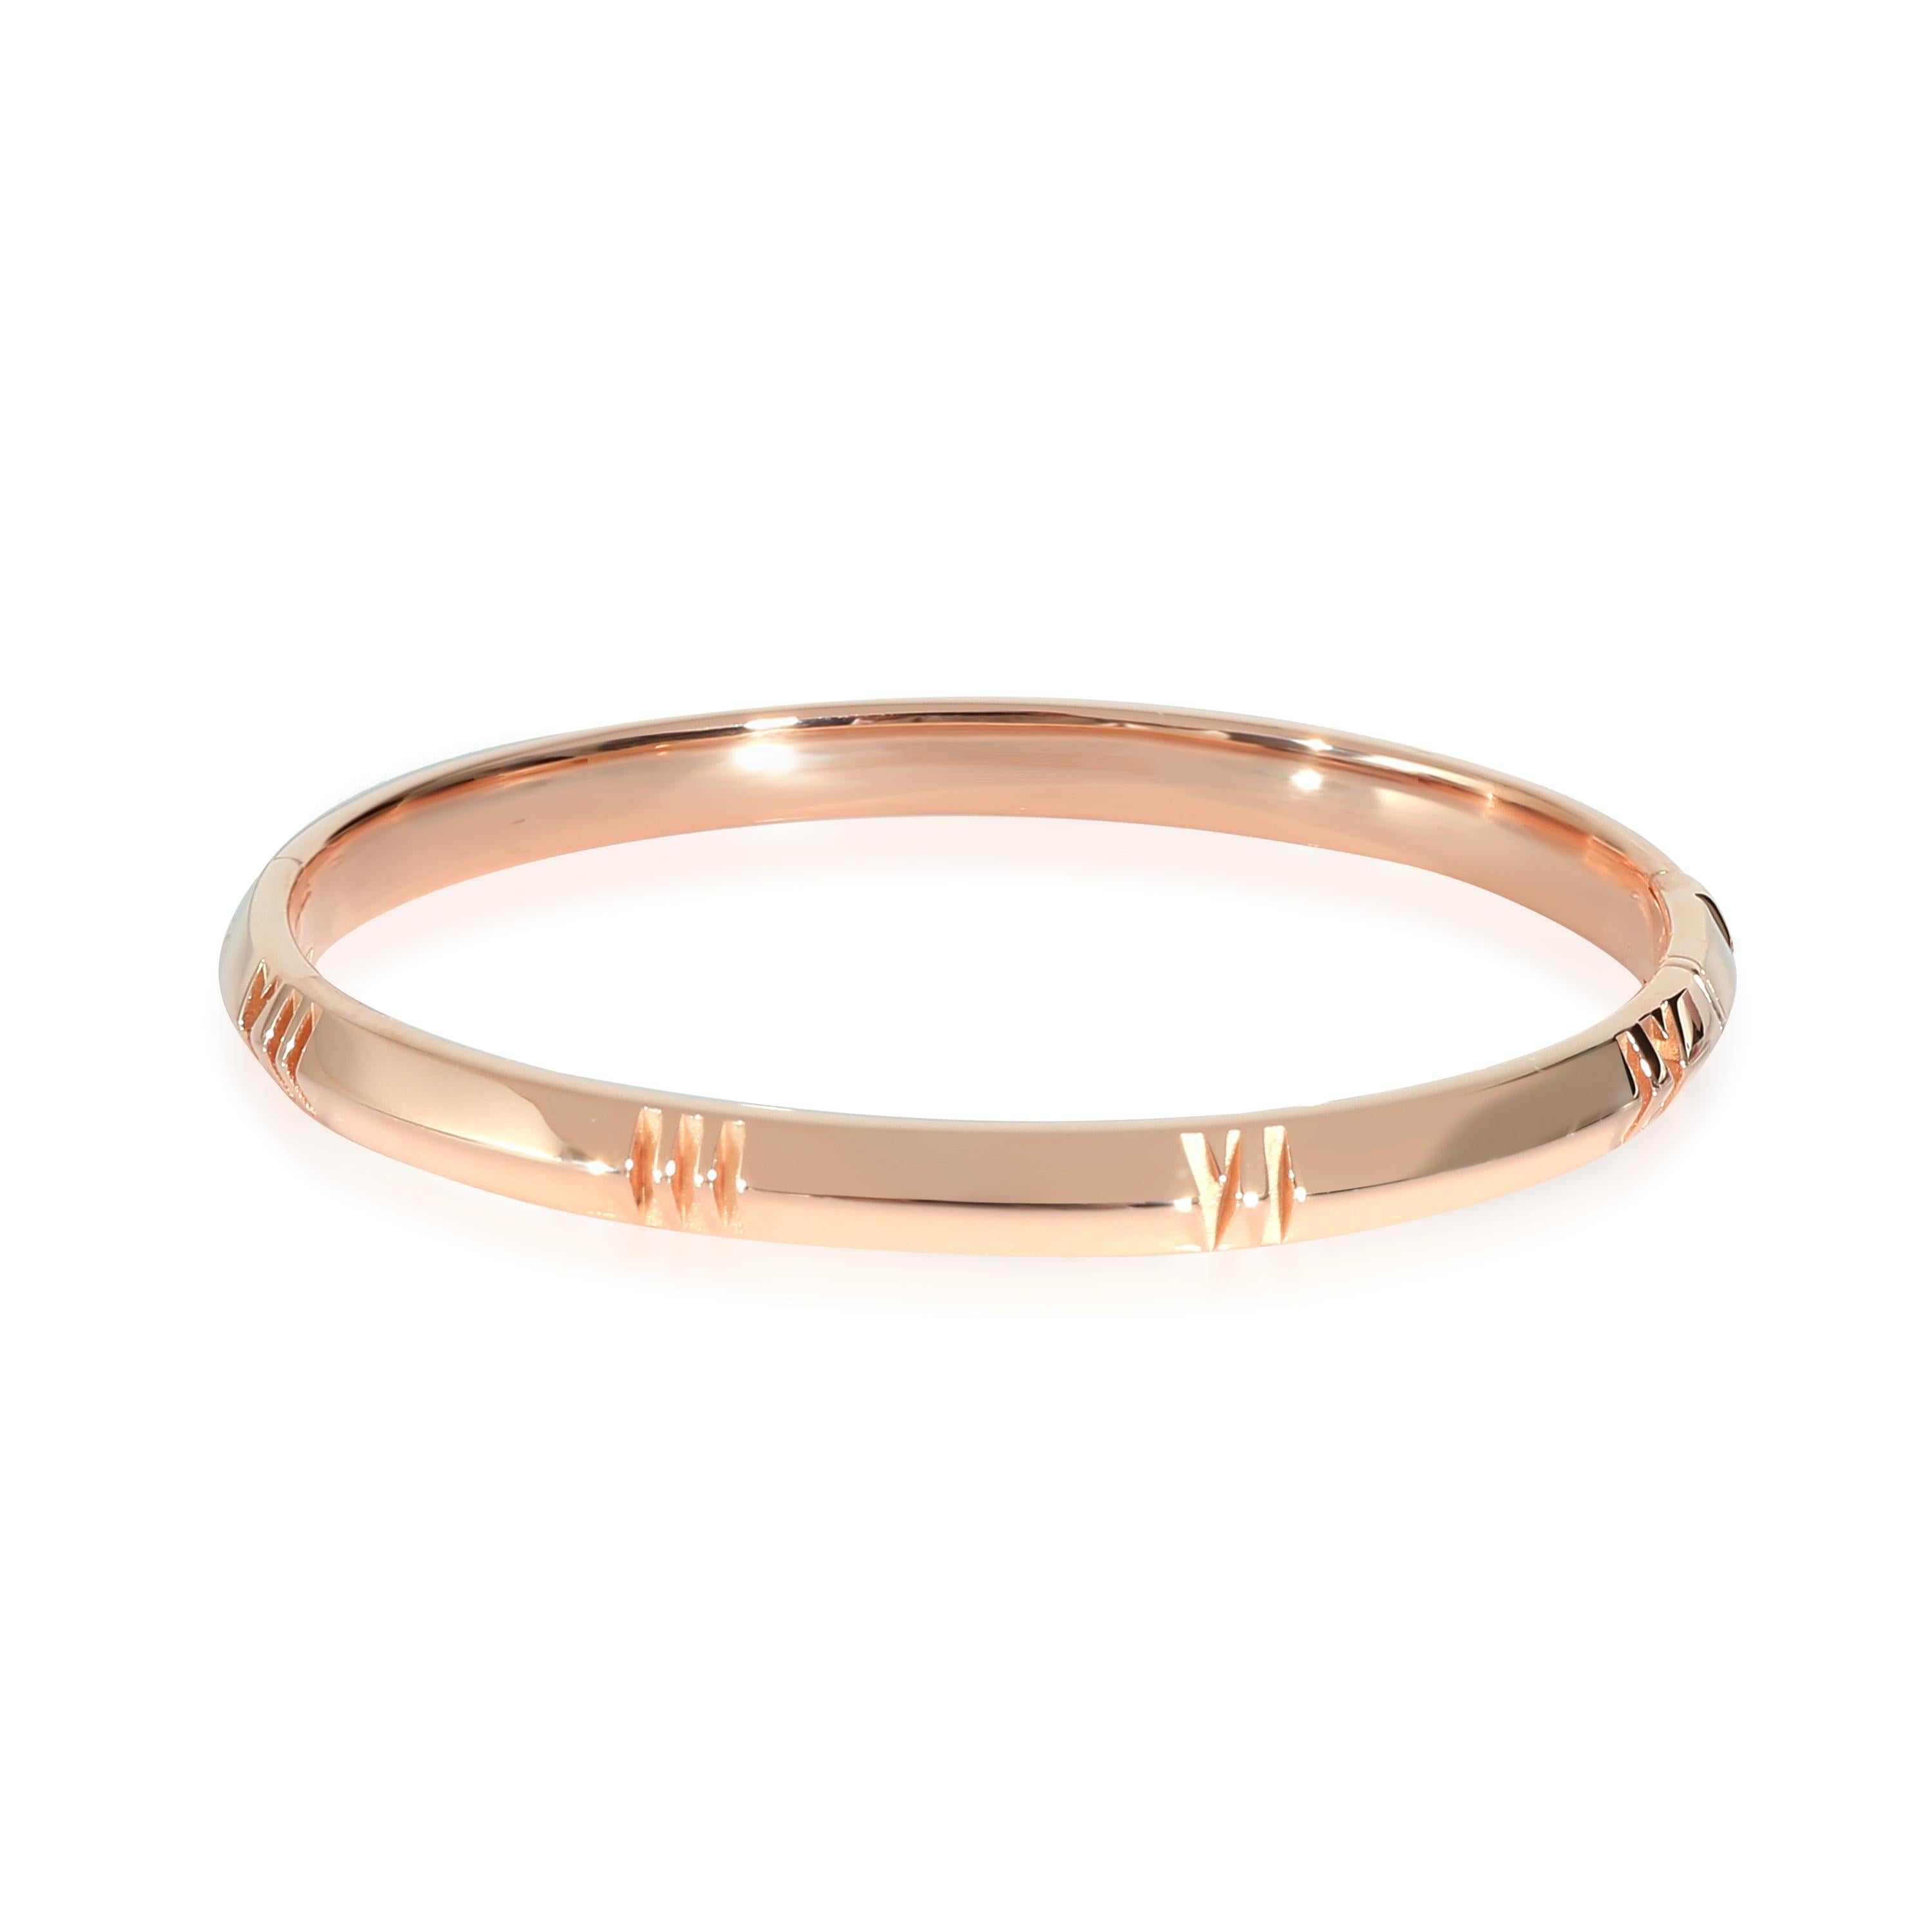 Tiffany & Co. Atlas Bracelet in 18k Rose Gold

PRIMARY DETAILS
SKU: 136313
Listing Title: Tiffany & Co. Atlas Bracelet in 18k Rose Gold
Condition Description: Above Tiffany's New York flagship store is the Atlas clock, which is so renowned for its